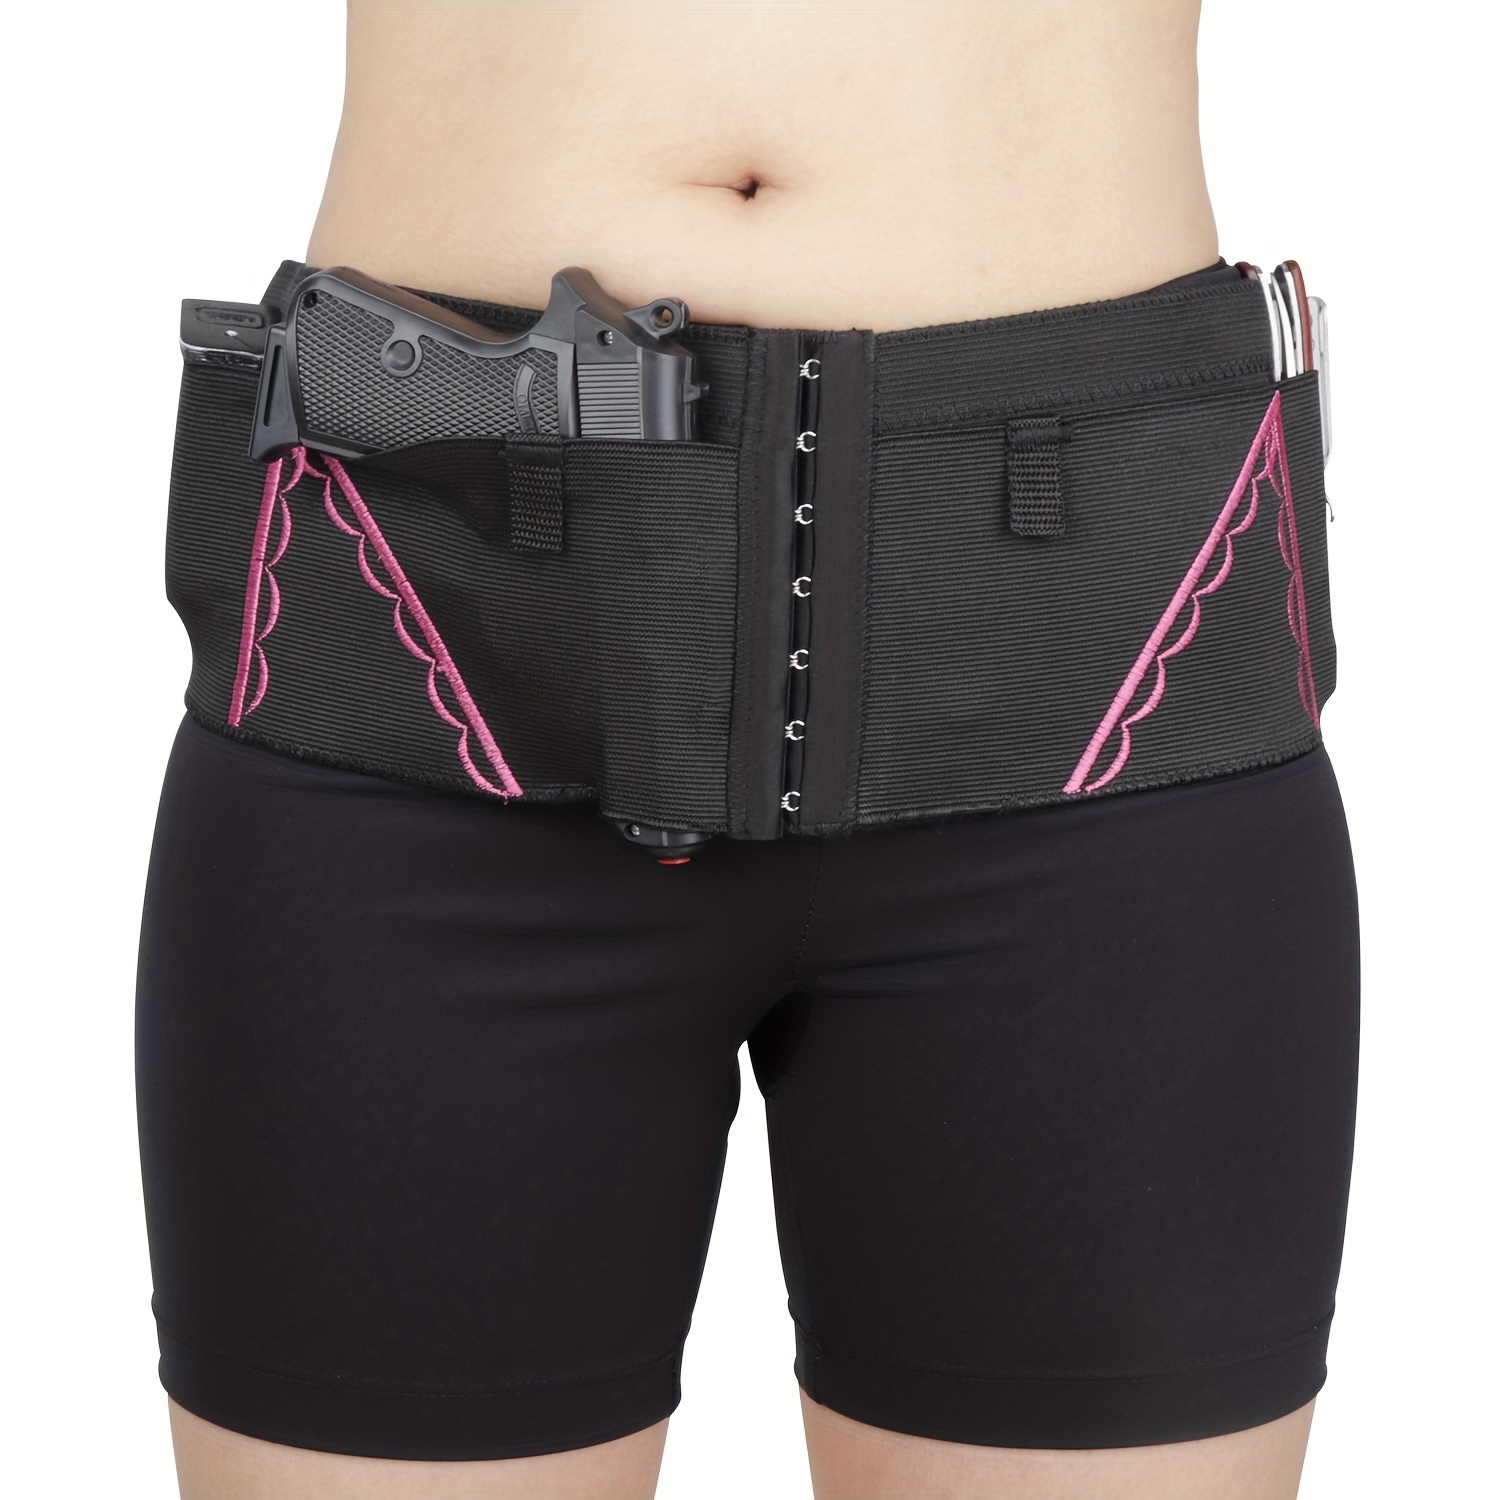 Belly Band Holster For Concealed Carry Breathable Waistband - Temu